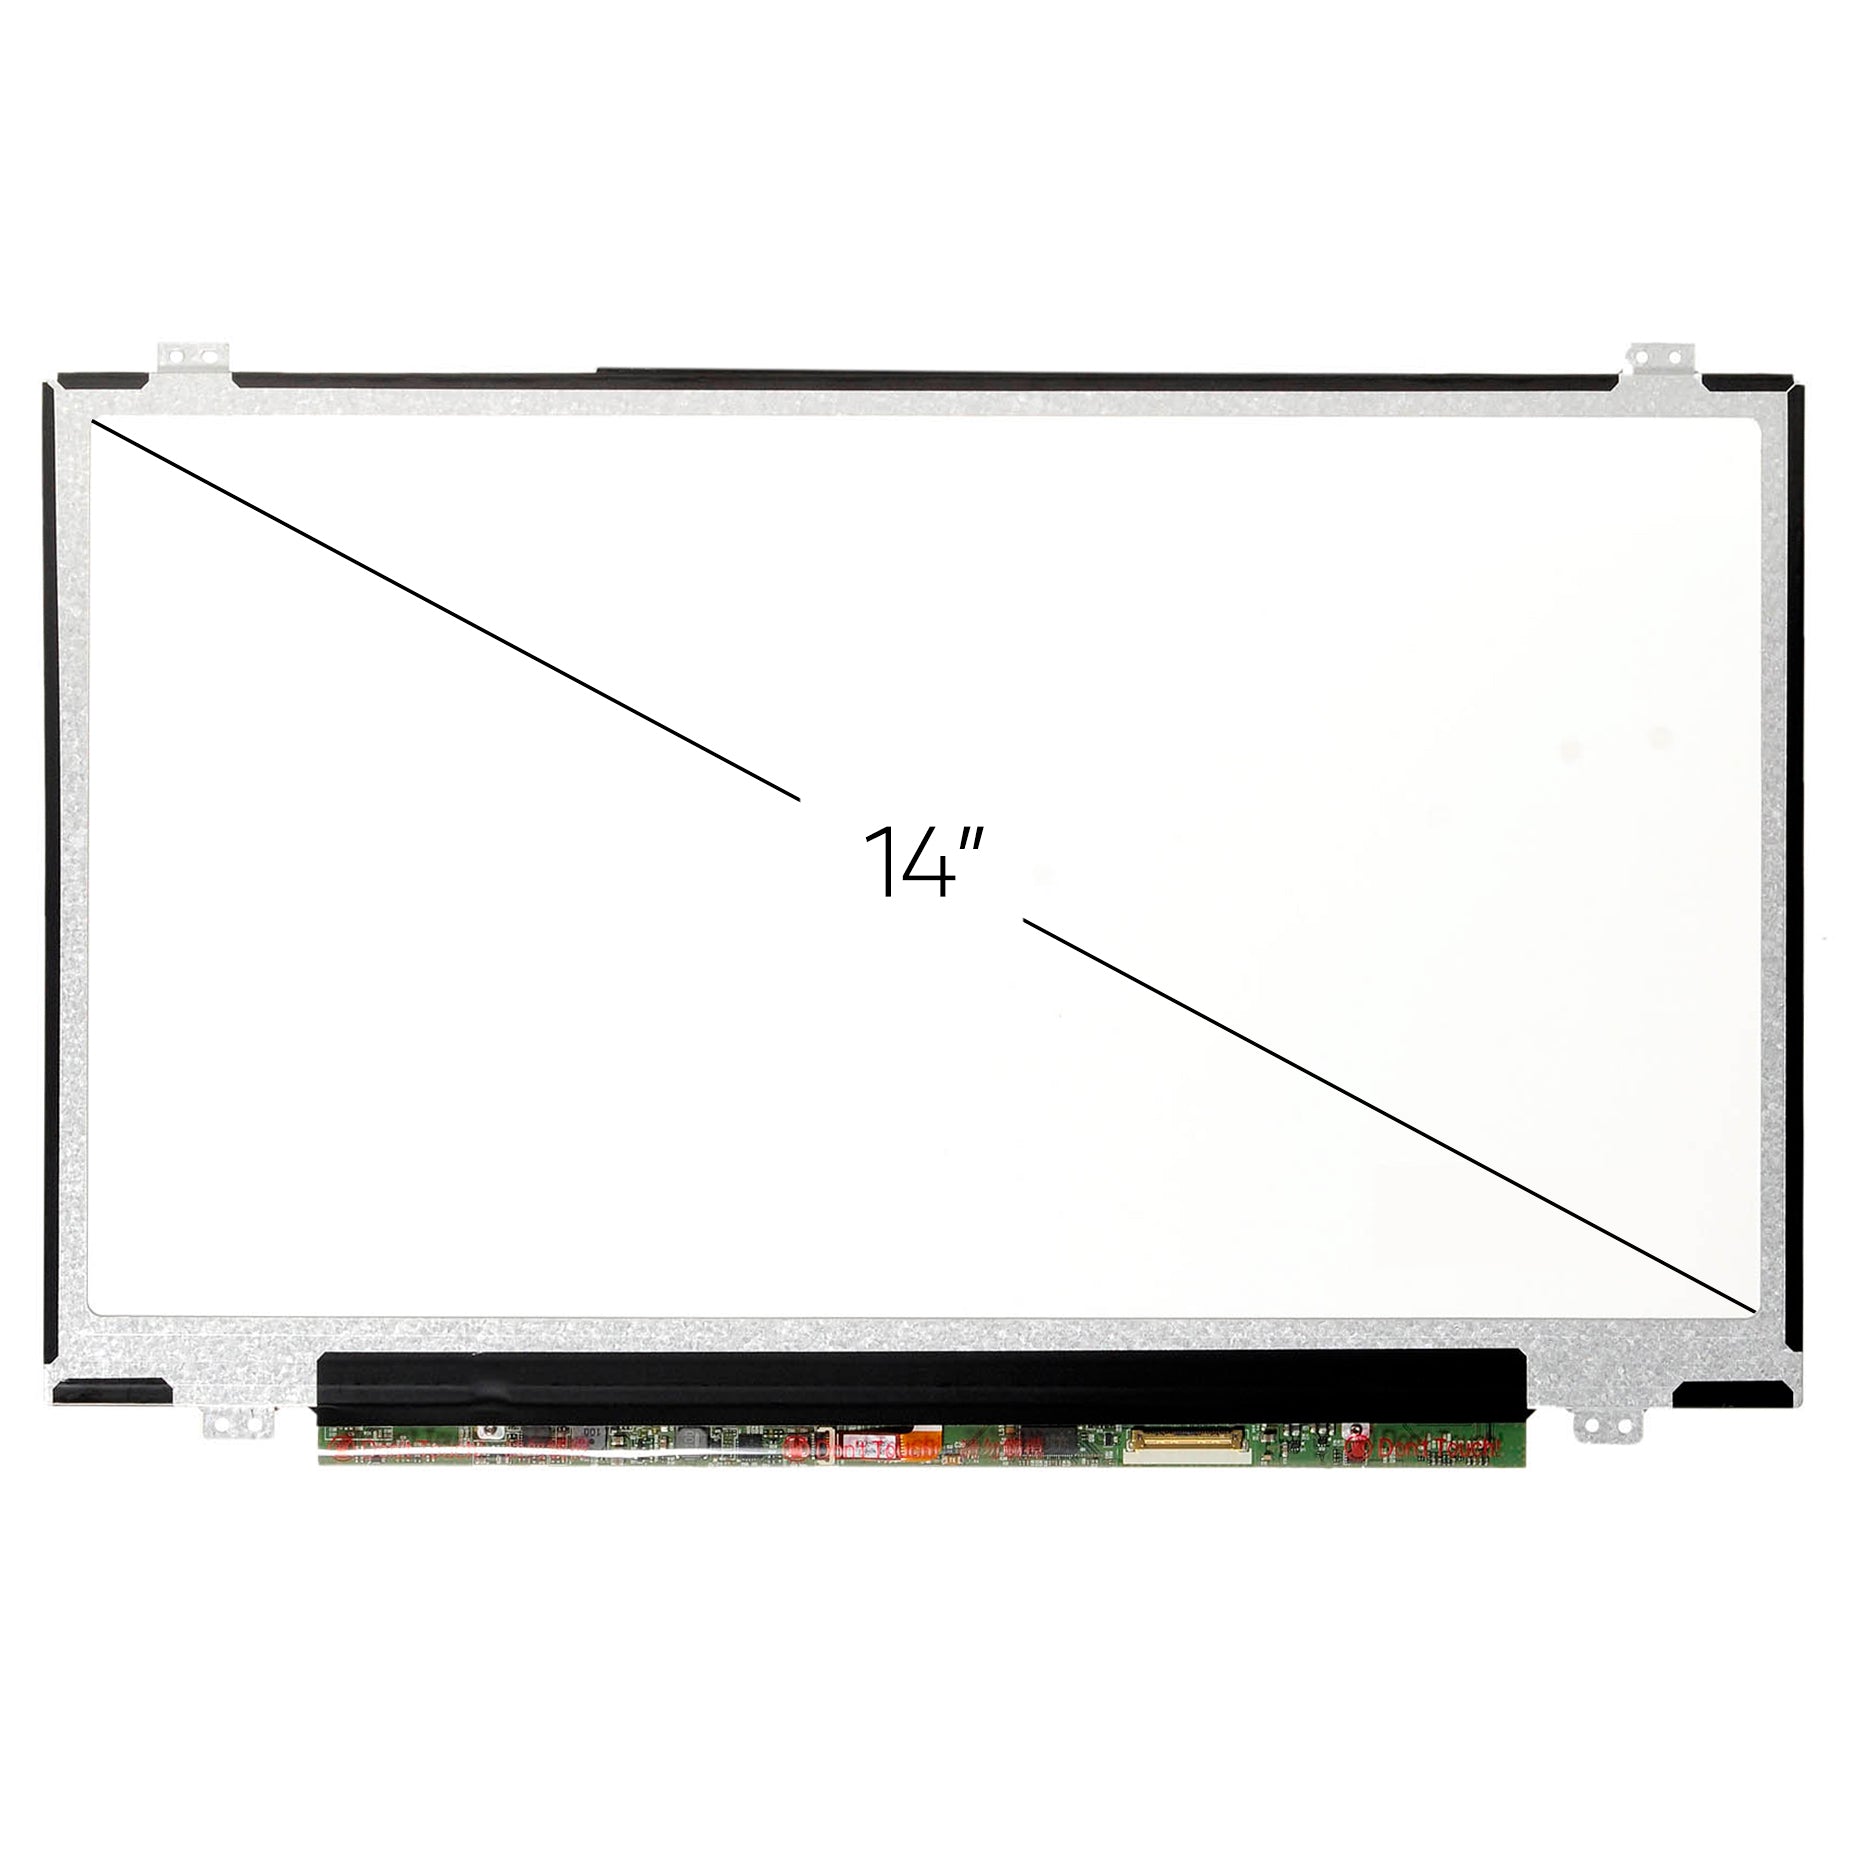 Screen Replacement for LP140WF3(SP)(C1) FHD 1920x1080 IPS Matte LCD LED Display